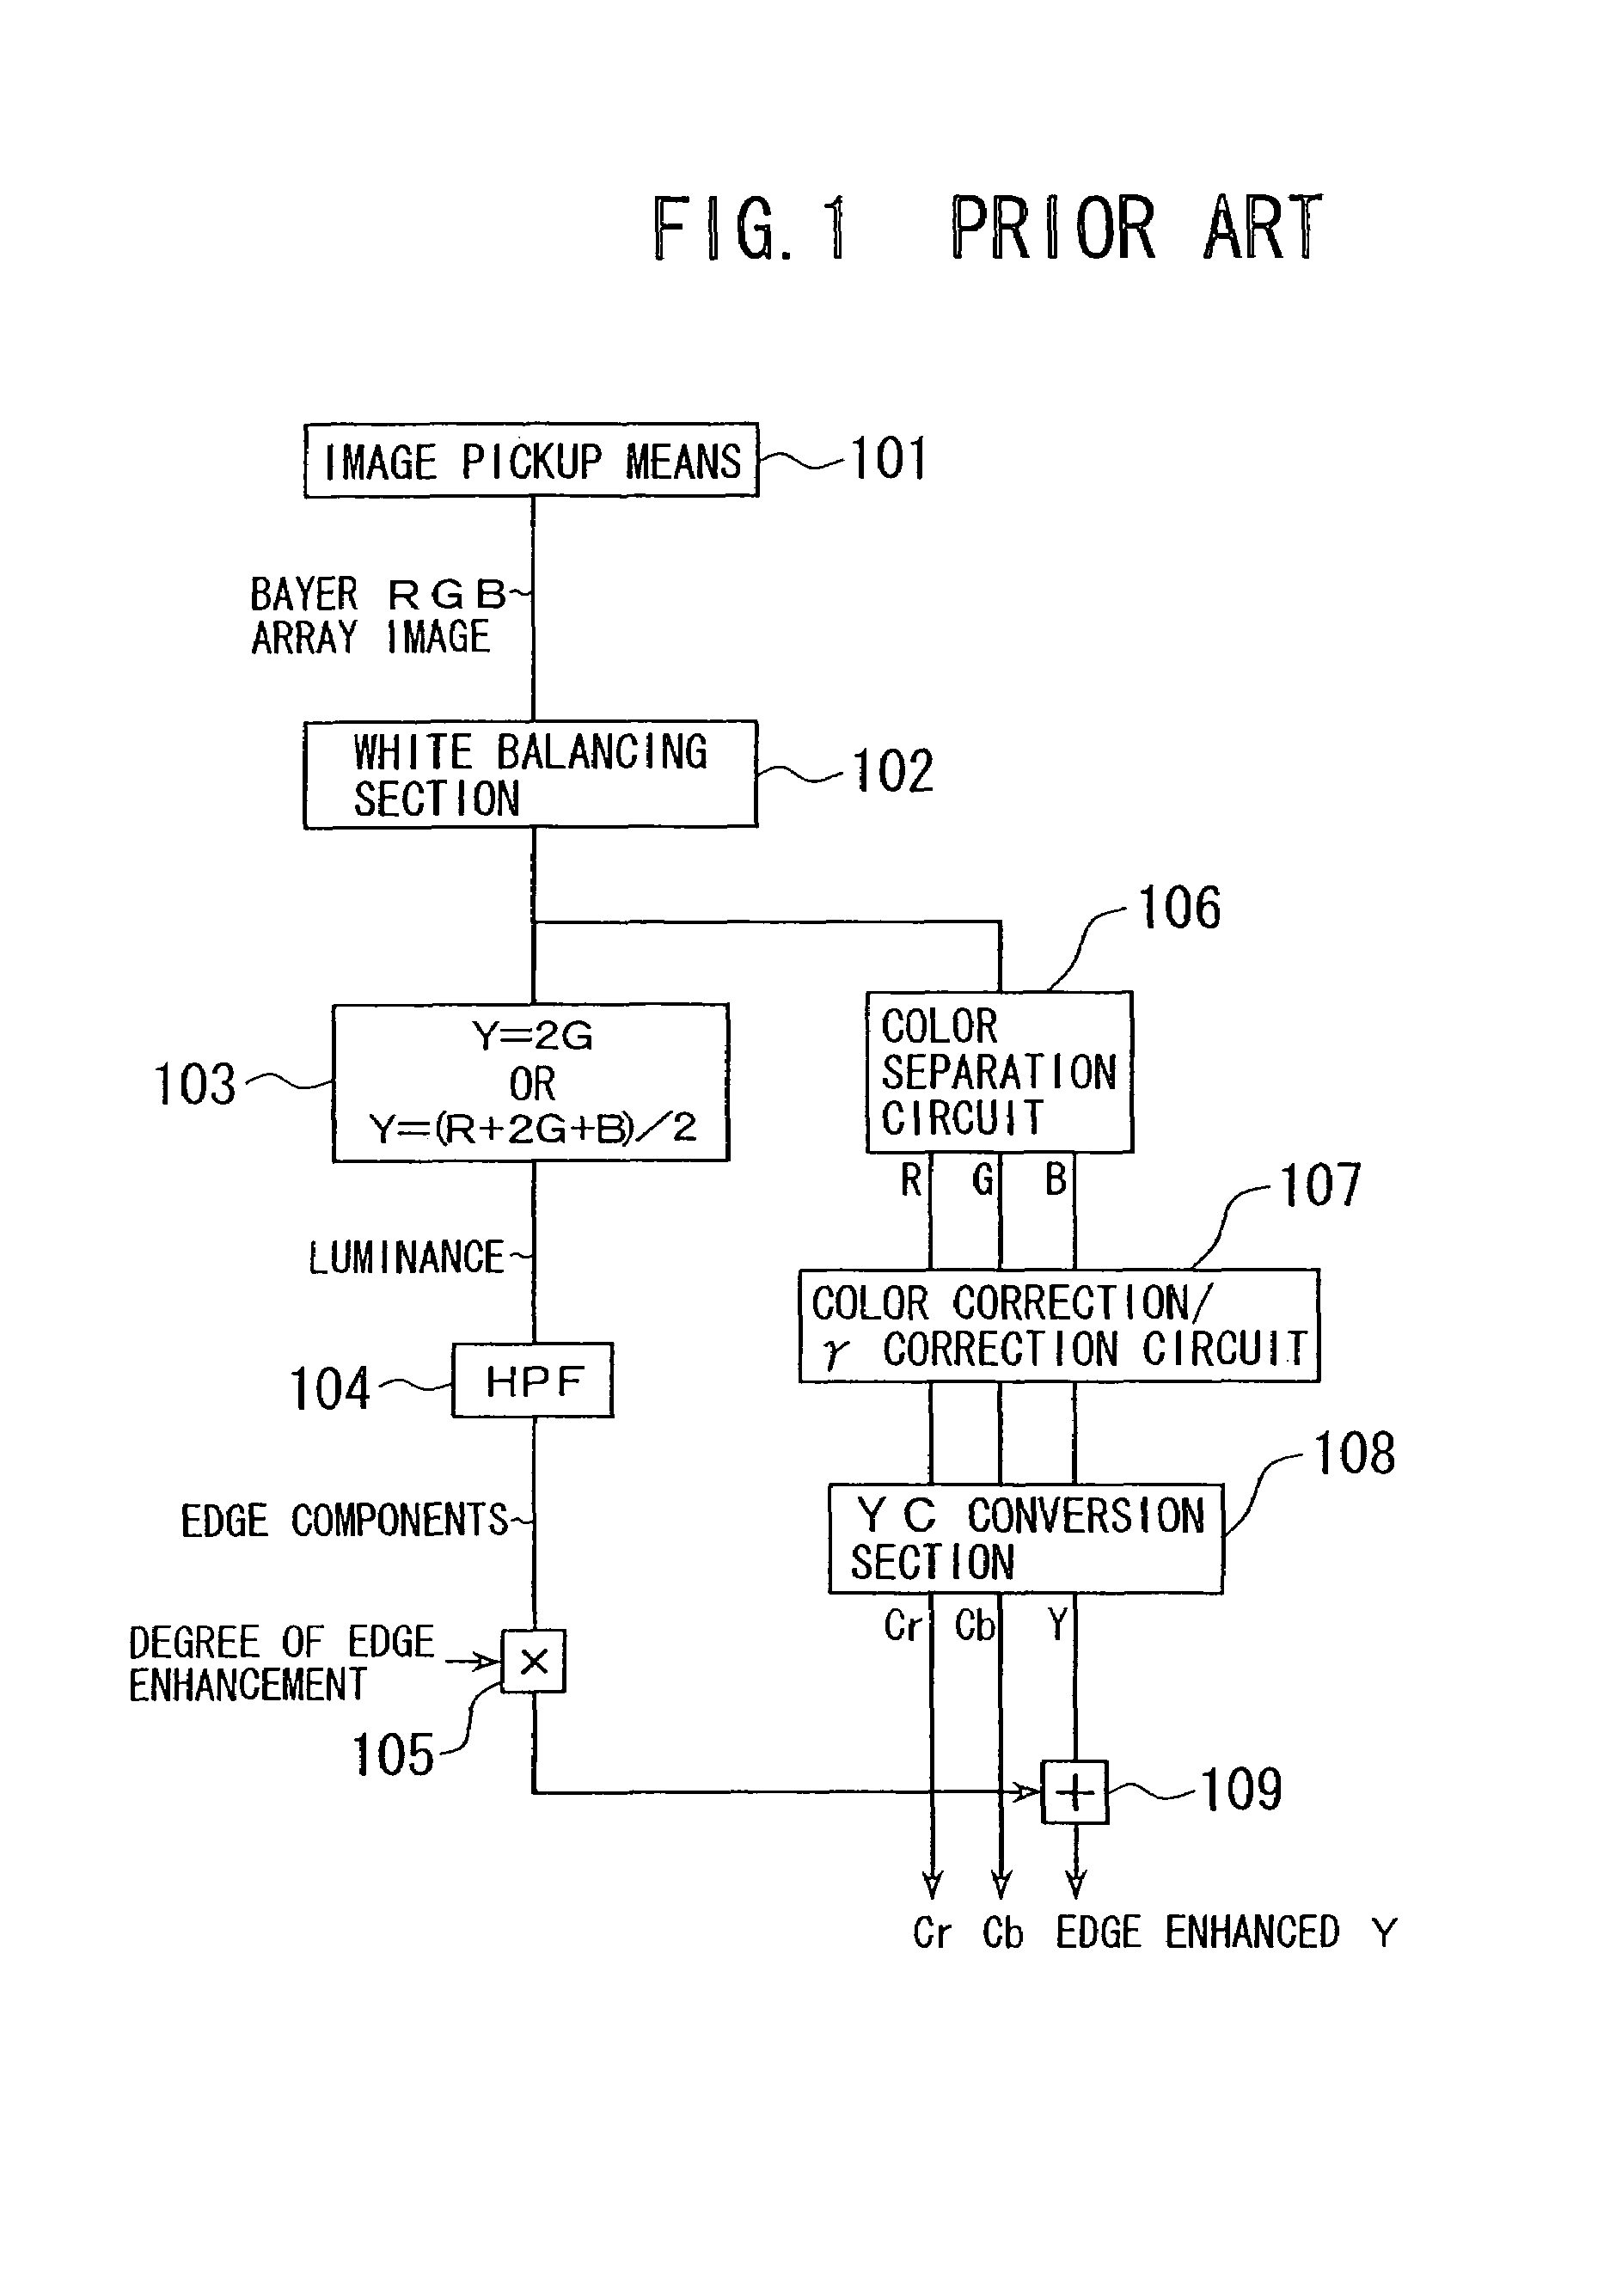 Image processing apparatus having a digital image processing section including enhancement of edges in an image